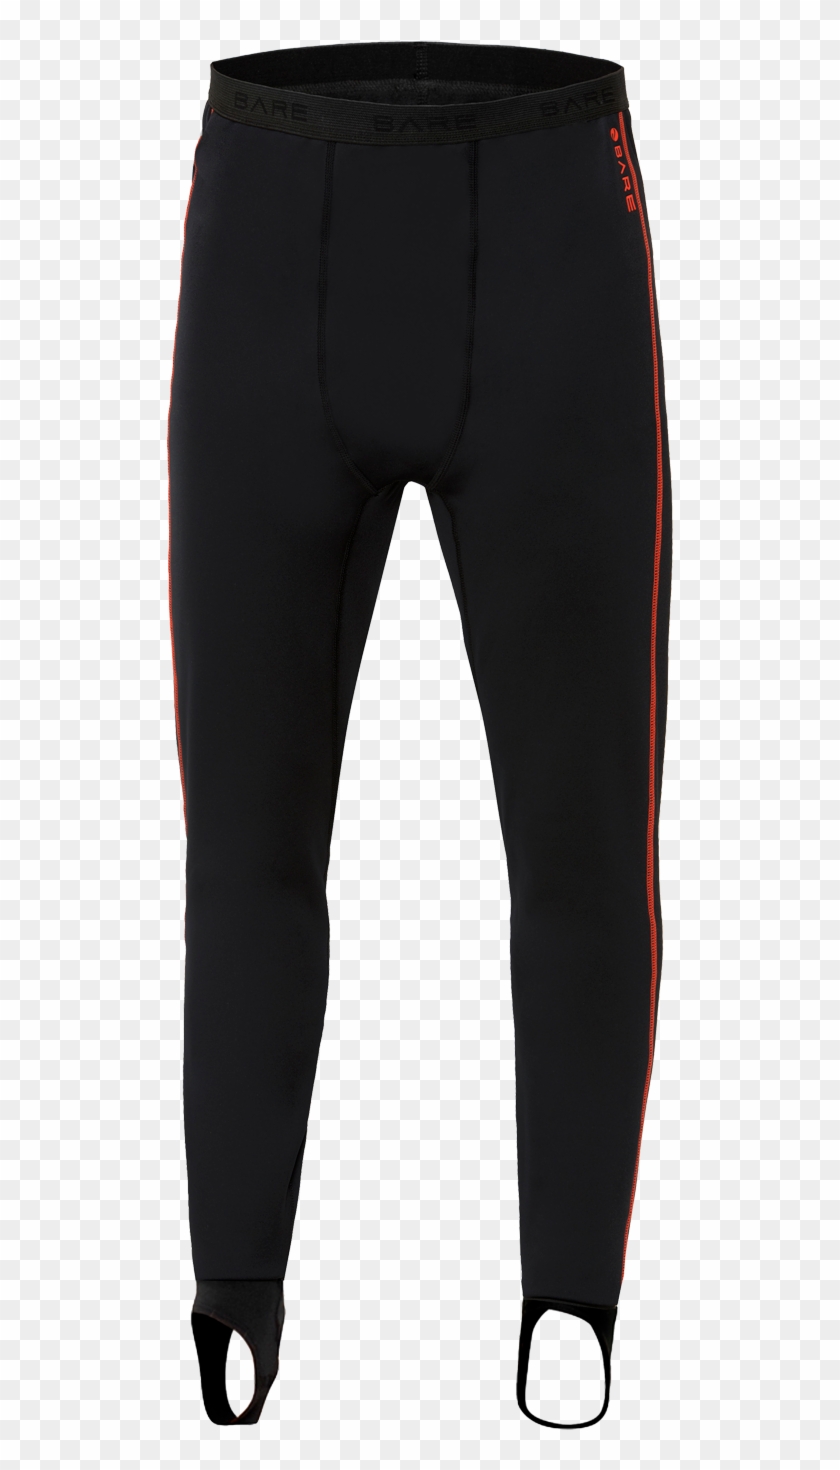 Ultrawarmth Base Layer Men's Pant - Under Armour 1280742 003 Clipart #4021279